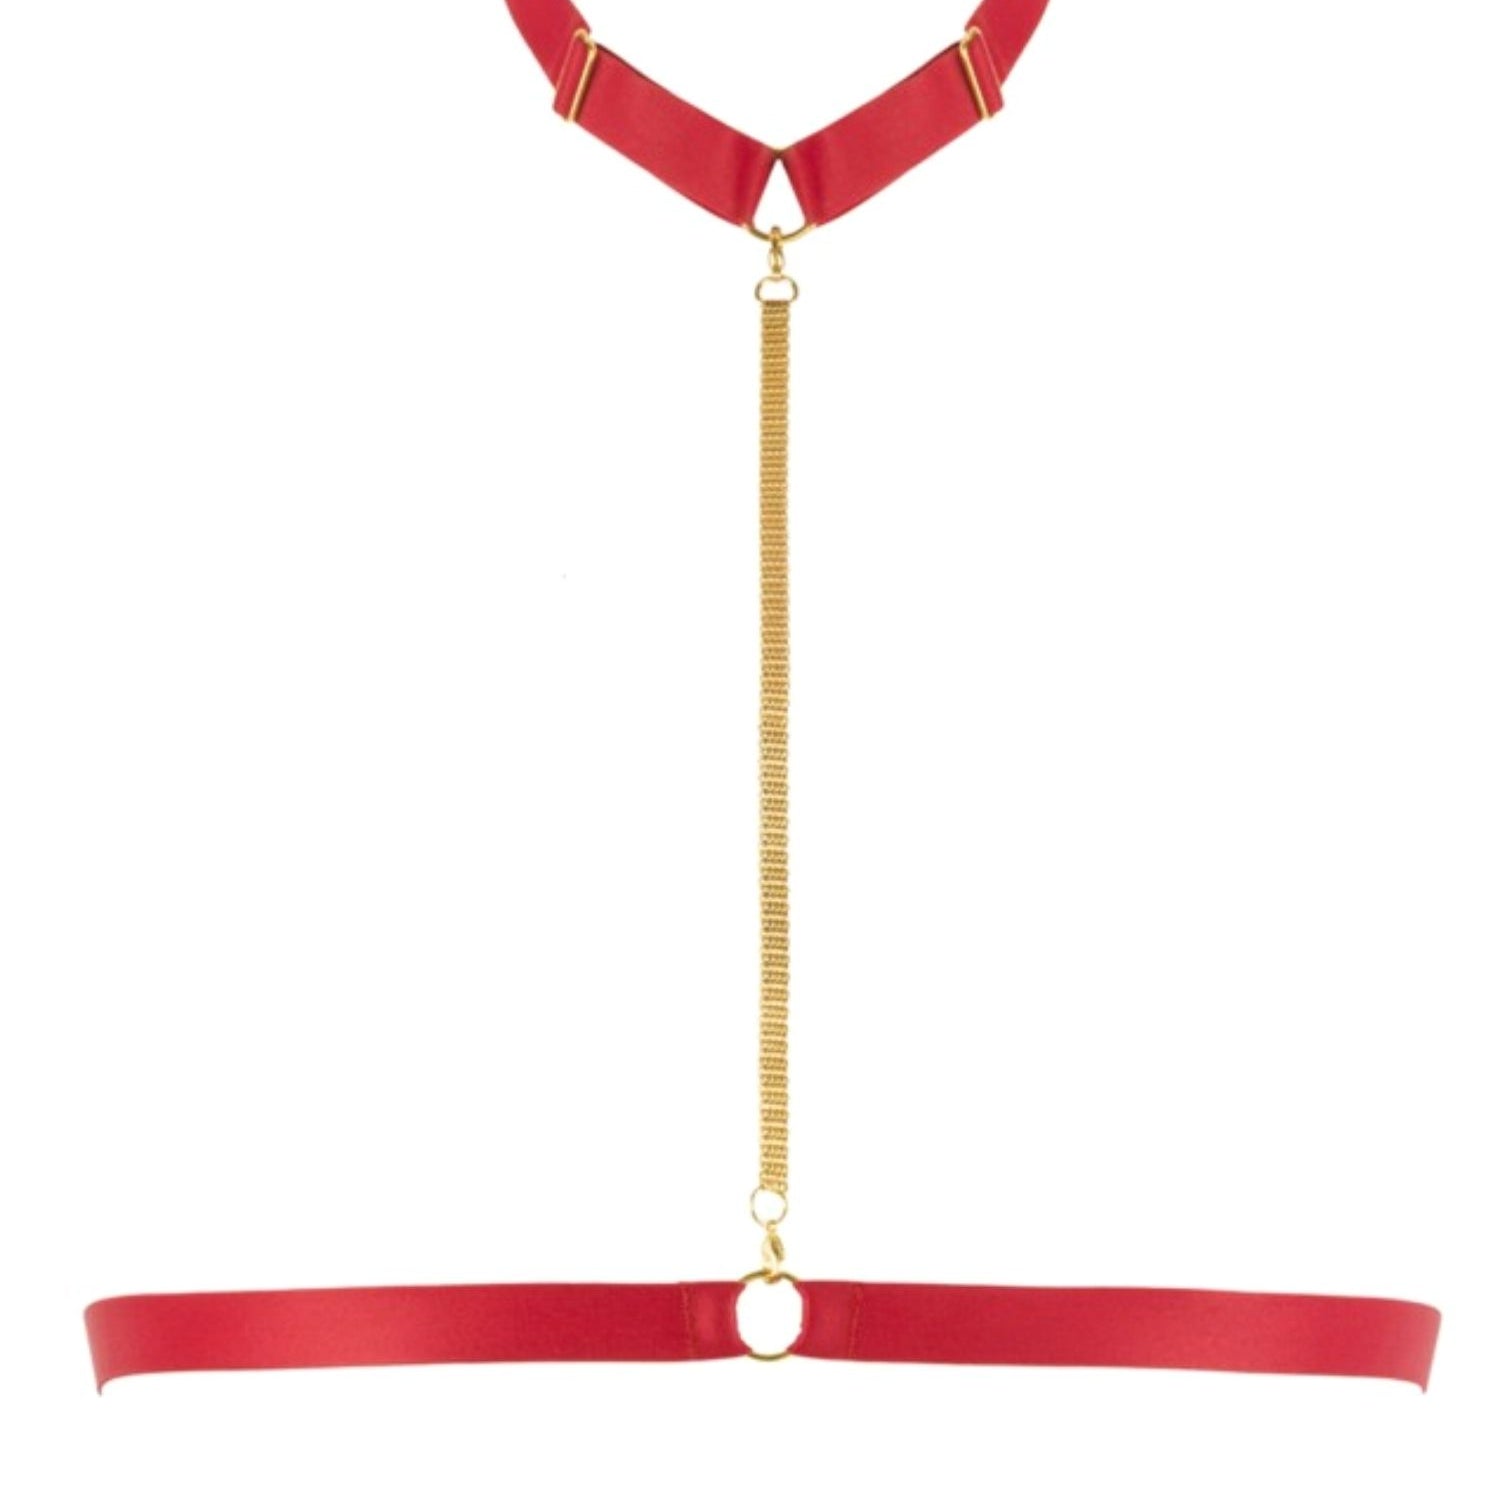 Maison Close Tapage Nocturne Harness (Red) | Bodywear | Sexy Lingerie